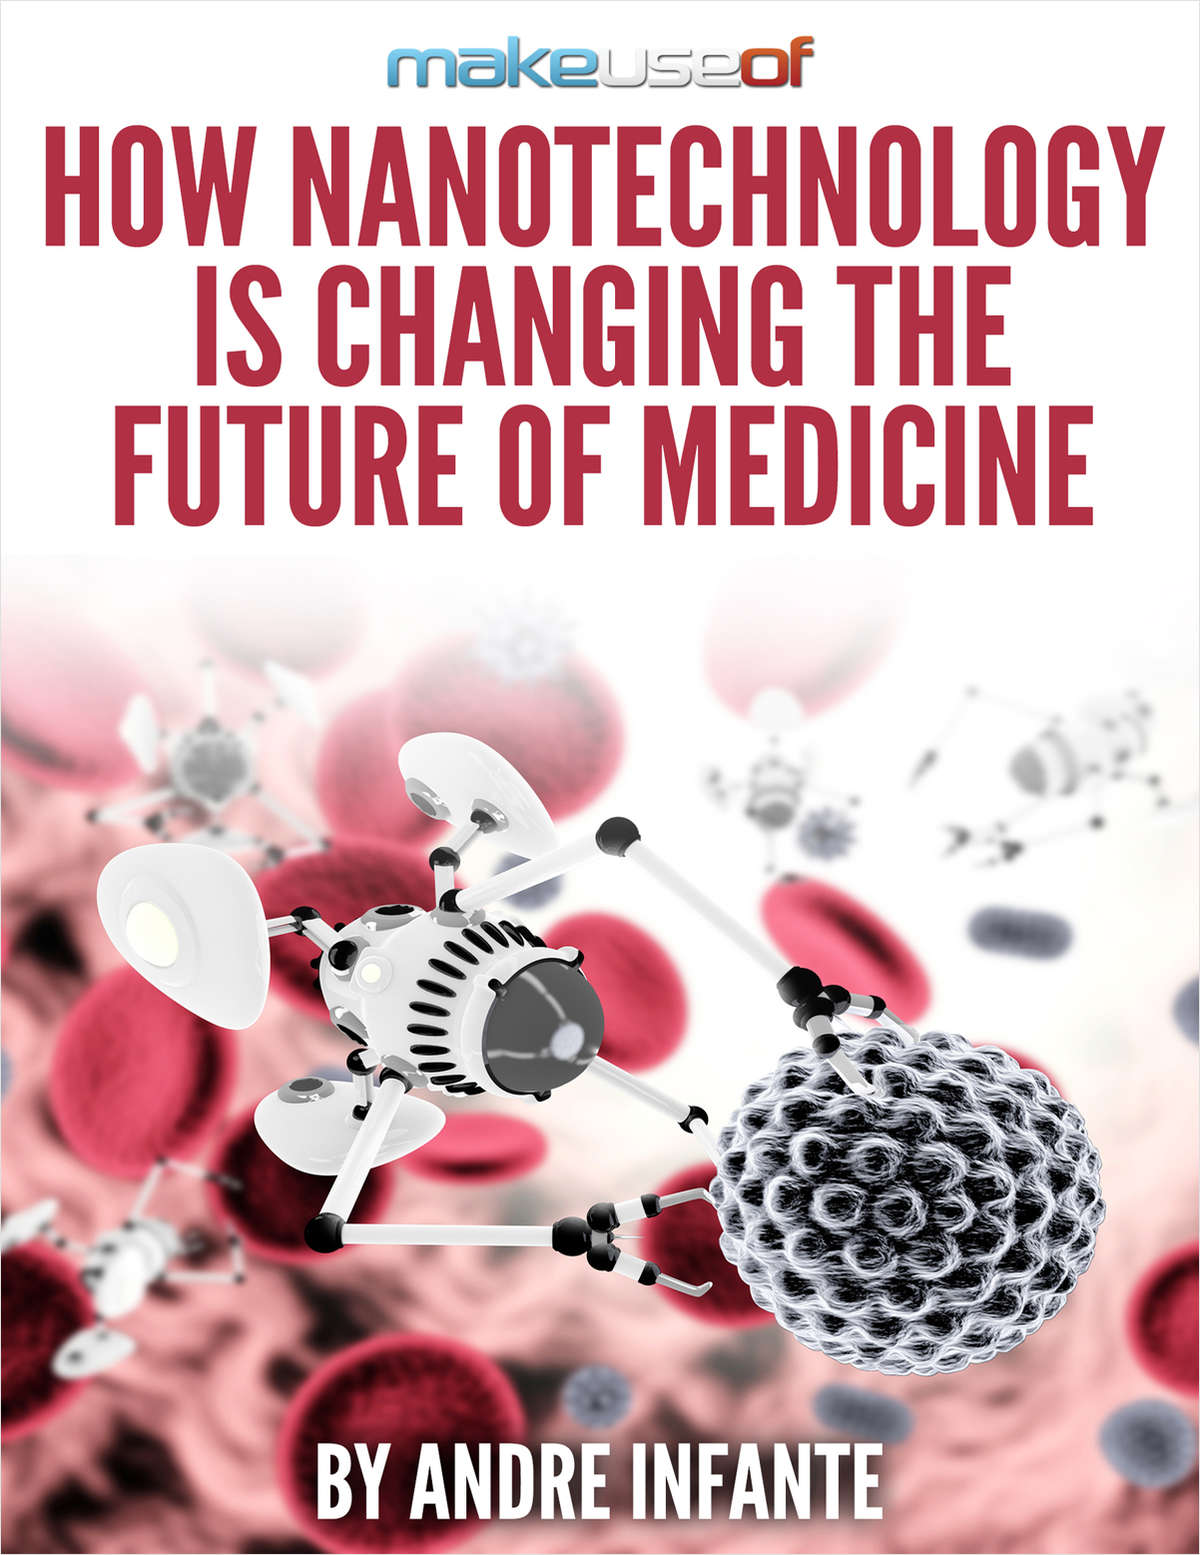 How Nanotechnology is Changing the Future of Medicine